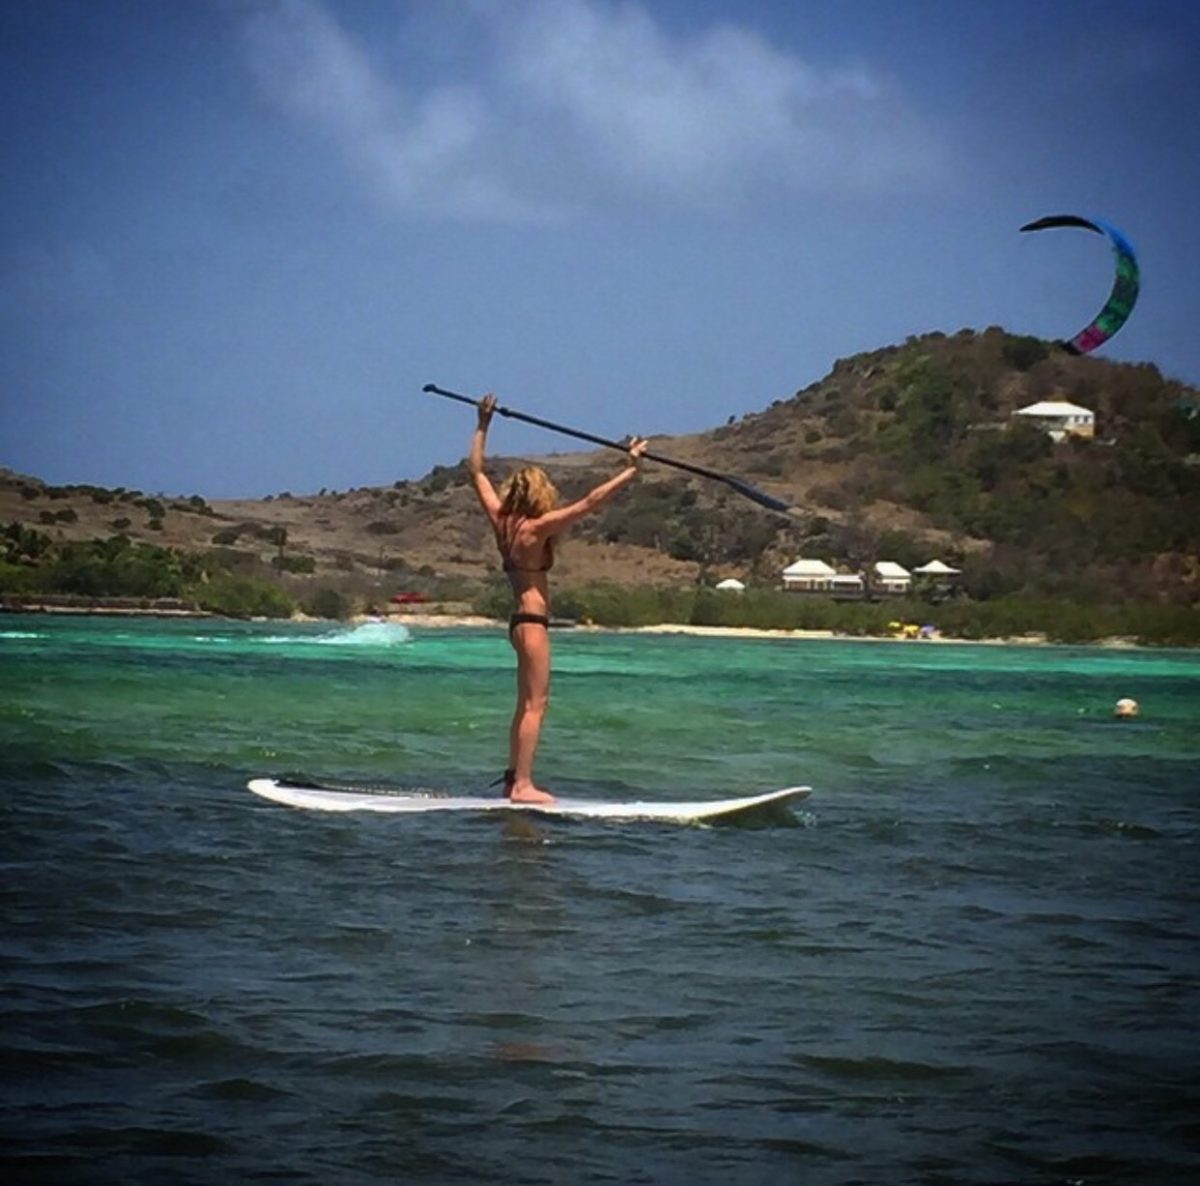 "This is at St. Barths at Selene Beach. Paddleboarding is one of those things I want to get better at. We like to do body surfing too. It’s so mellow...it’s not like we go there to be active. We do a little bit of sailing. We kind of do anything we want!"